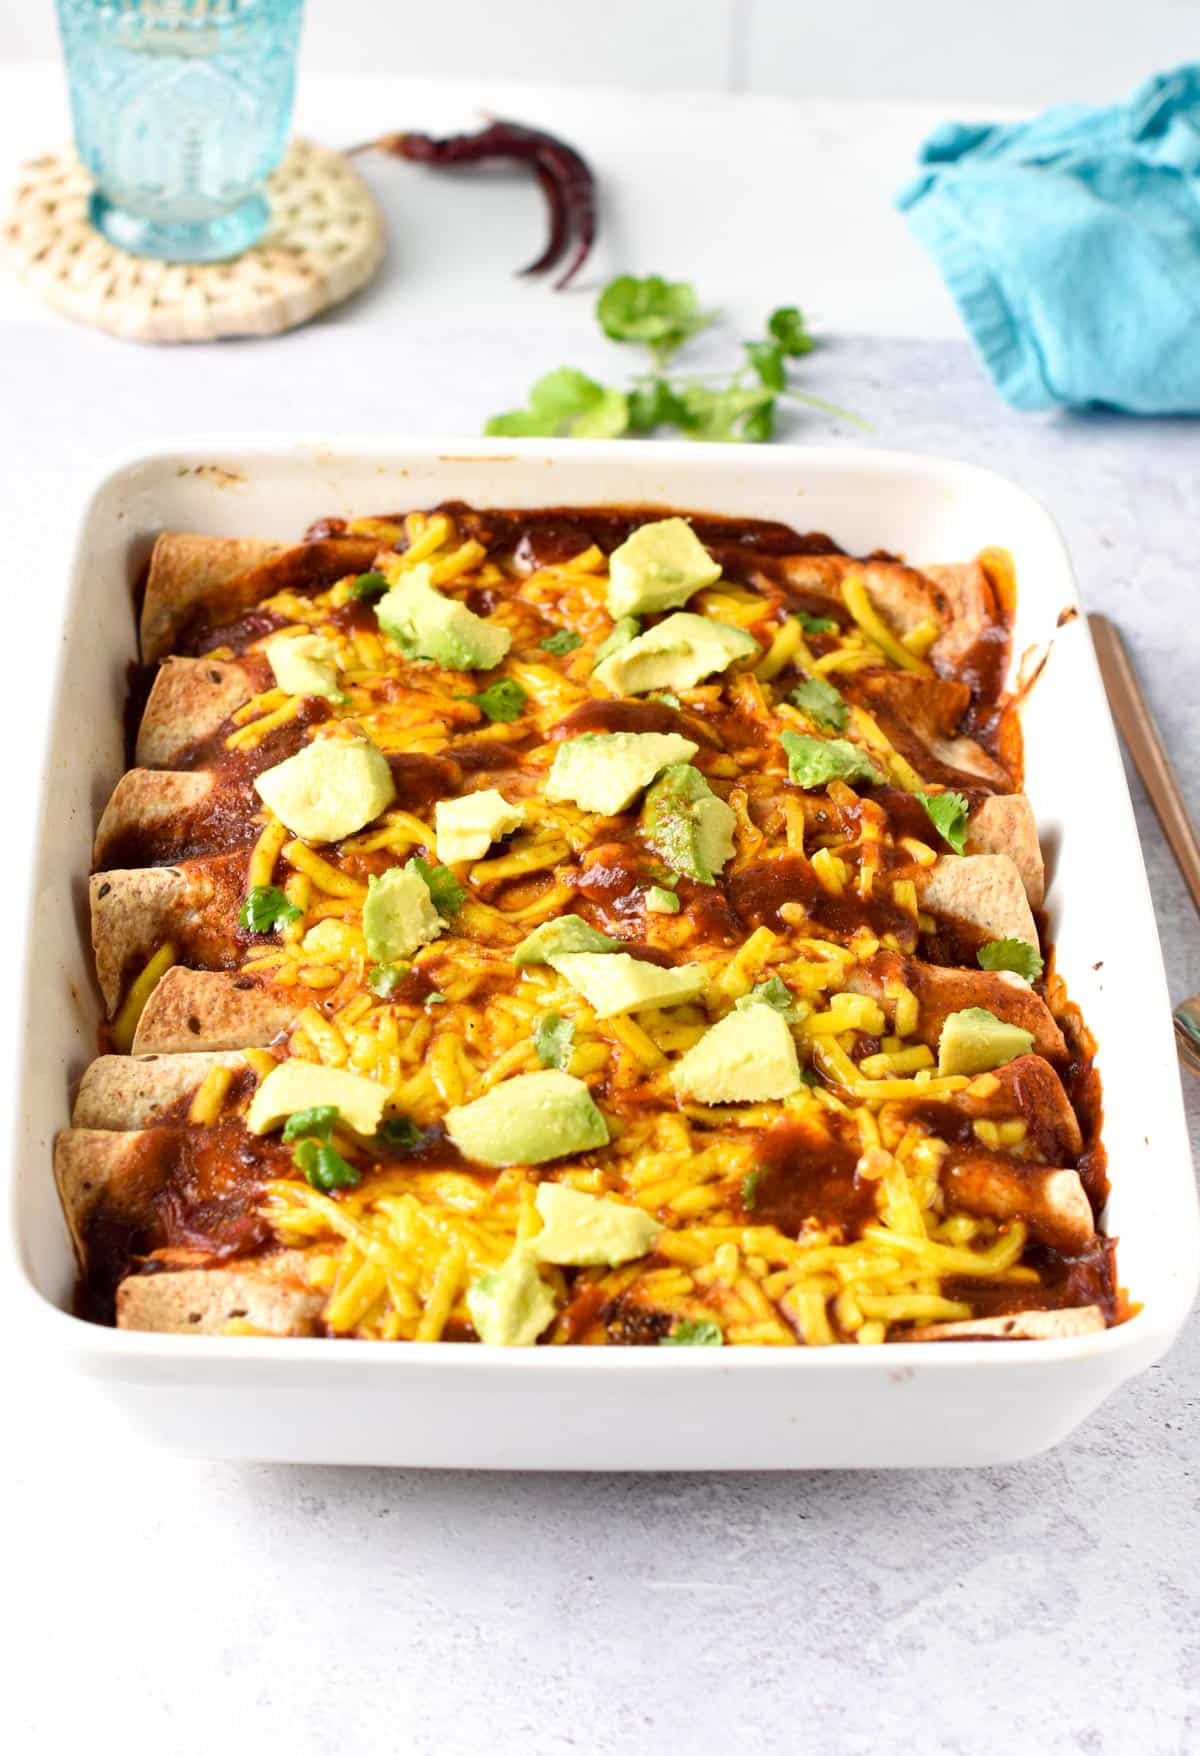 Vegan Enchiladas cooked in a large baking dish and decorated with fresh guacamole.